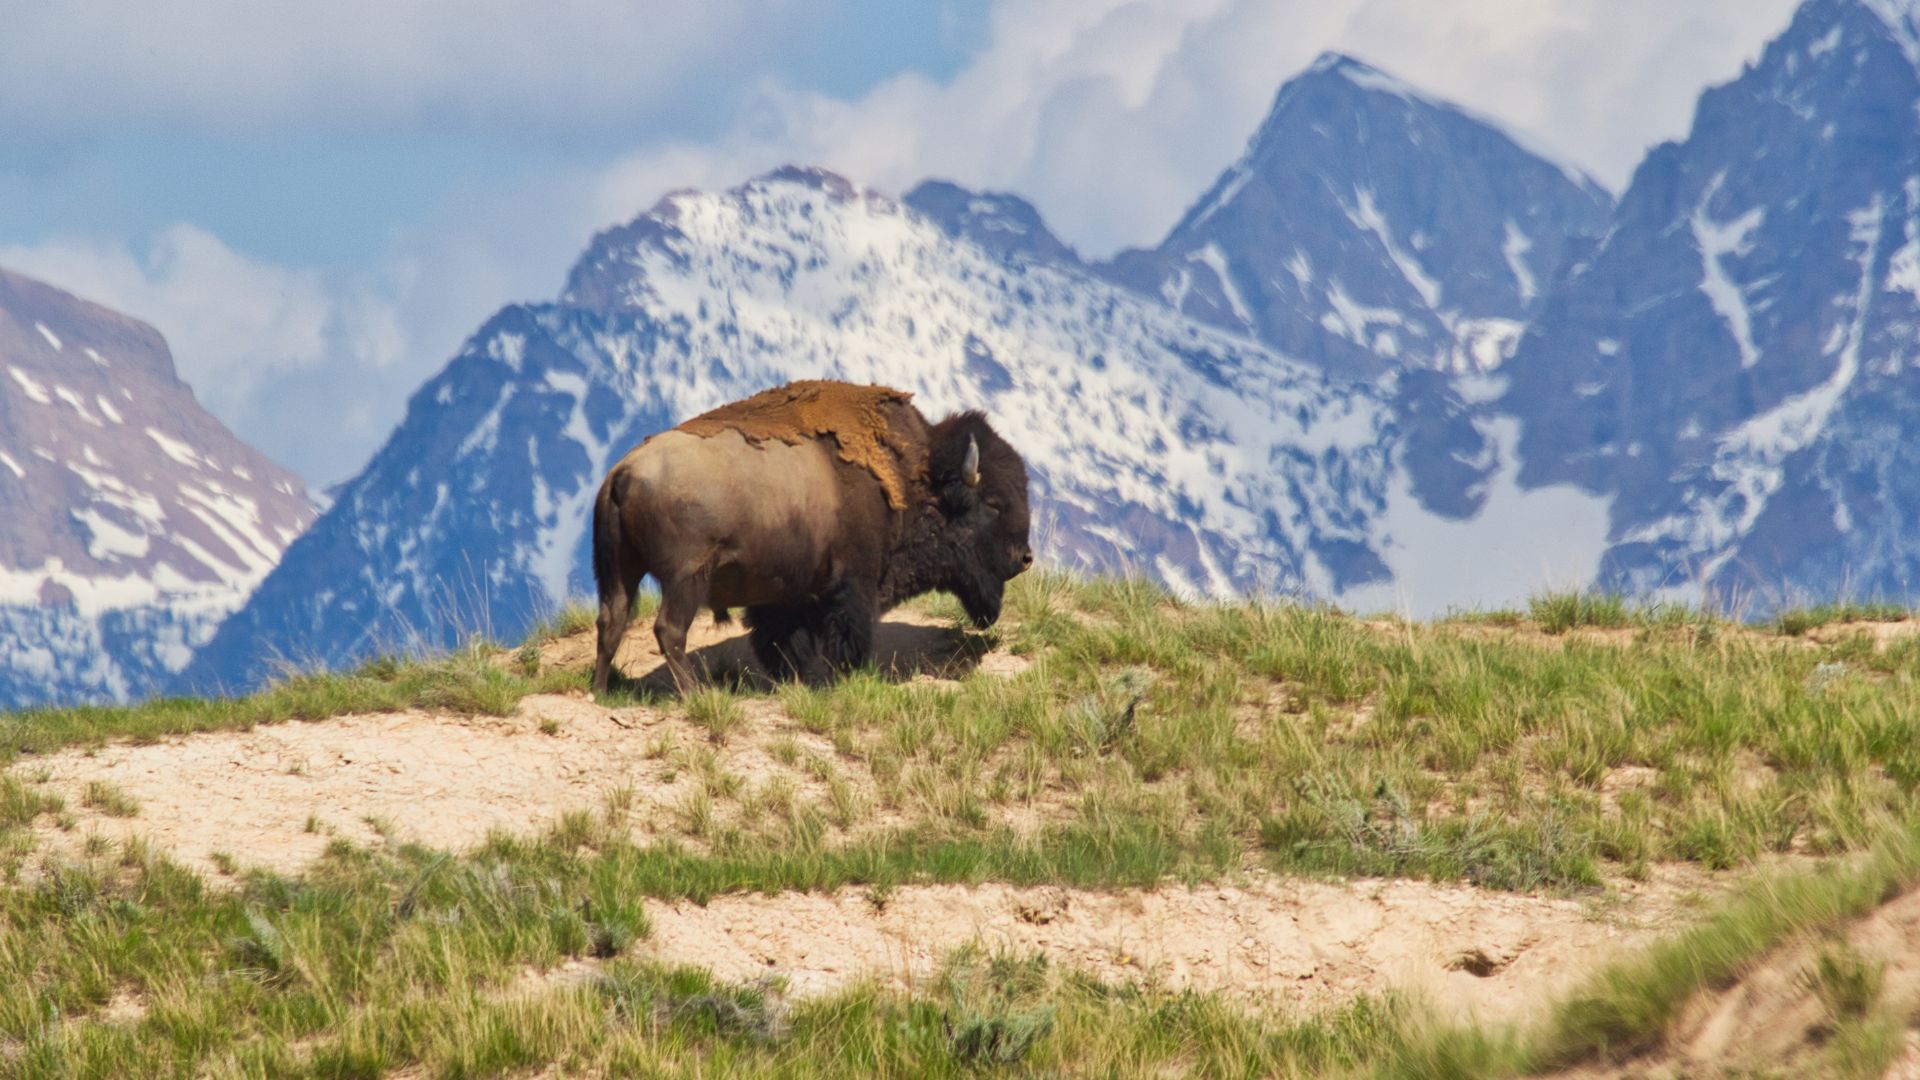 Bull buffalo on a field in front of snow-covered peaks